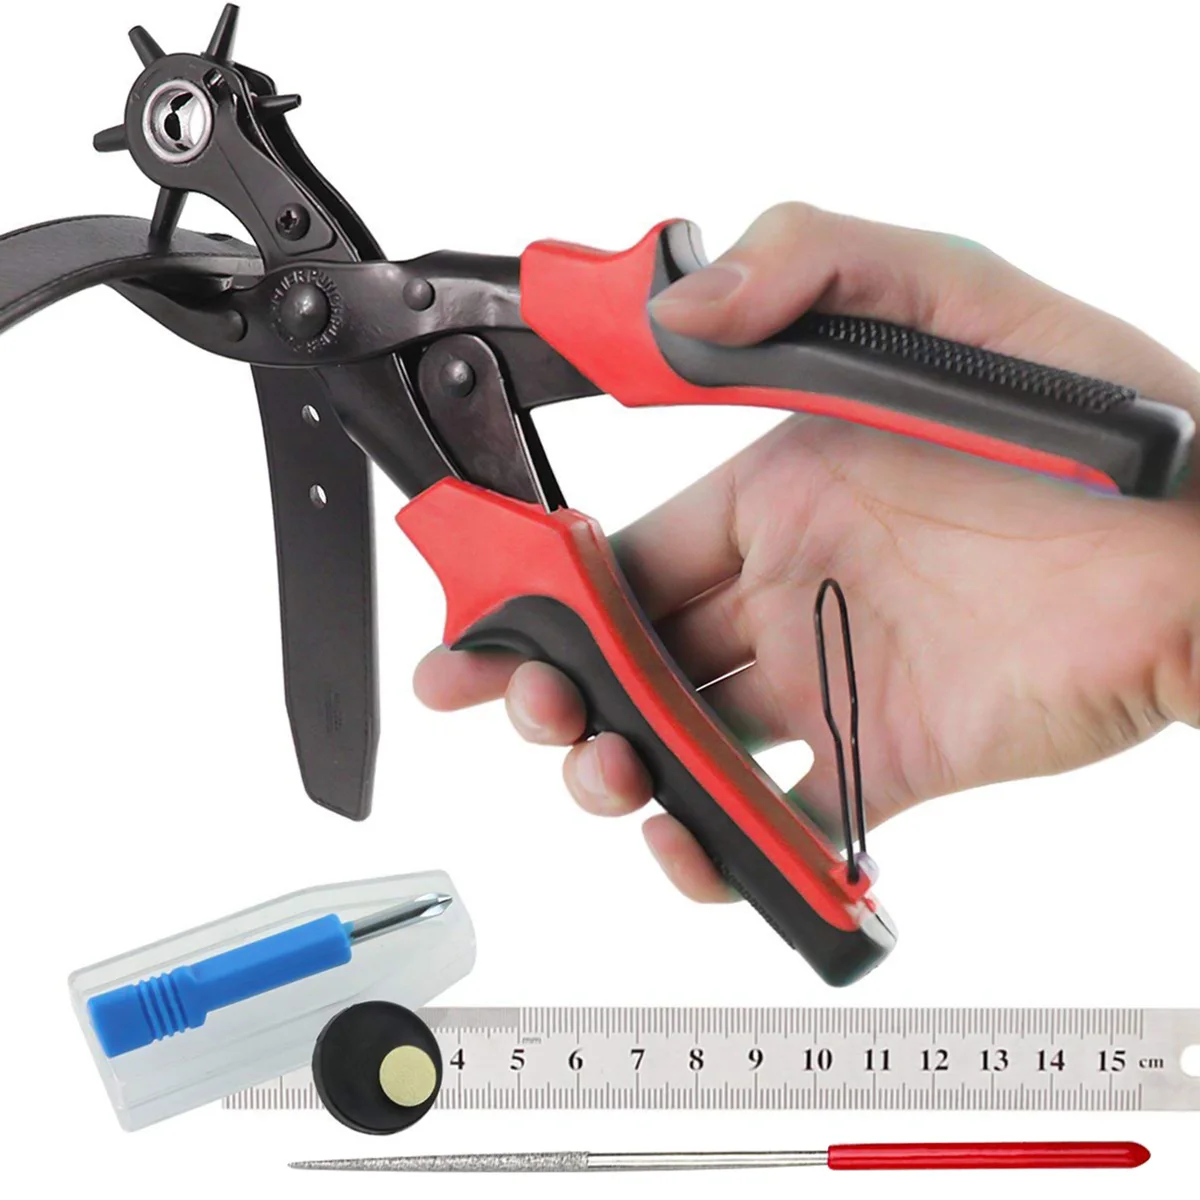 

Rivets Eyelet Belt Hole Puncher Pliers Press Eyelets Grommets Tool With 6 Different Hole Sizes Leather Craft Sewing Tools